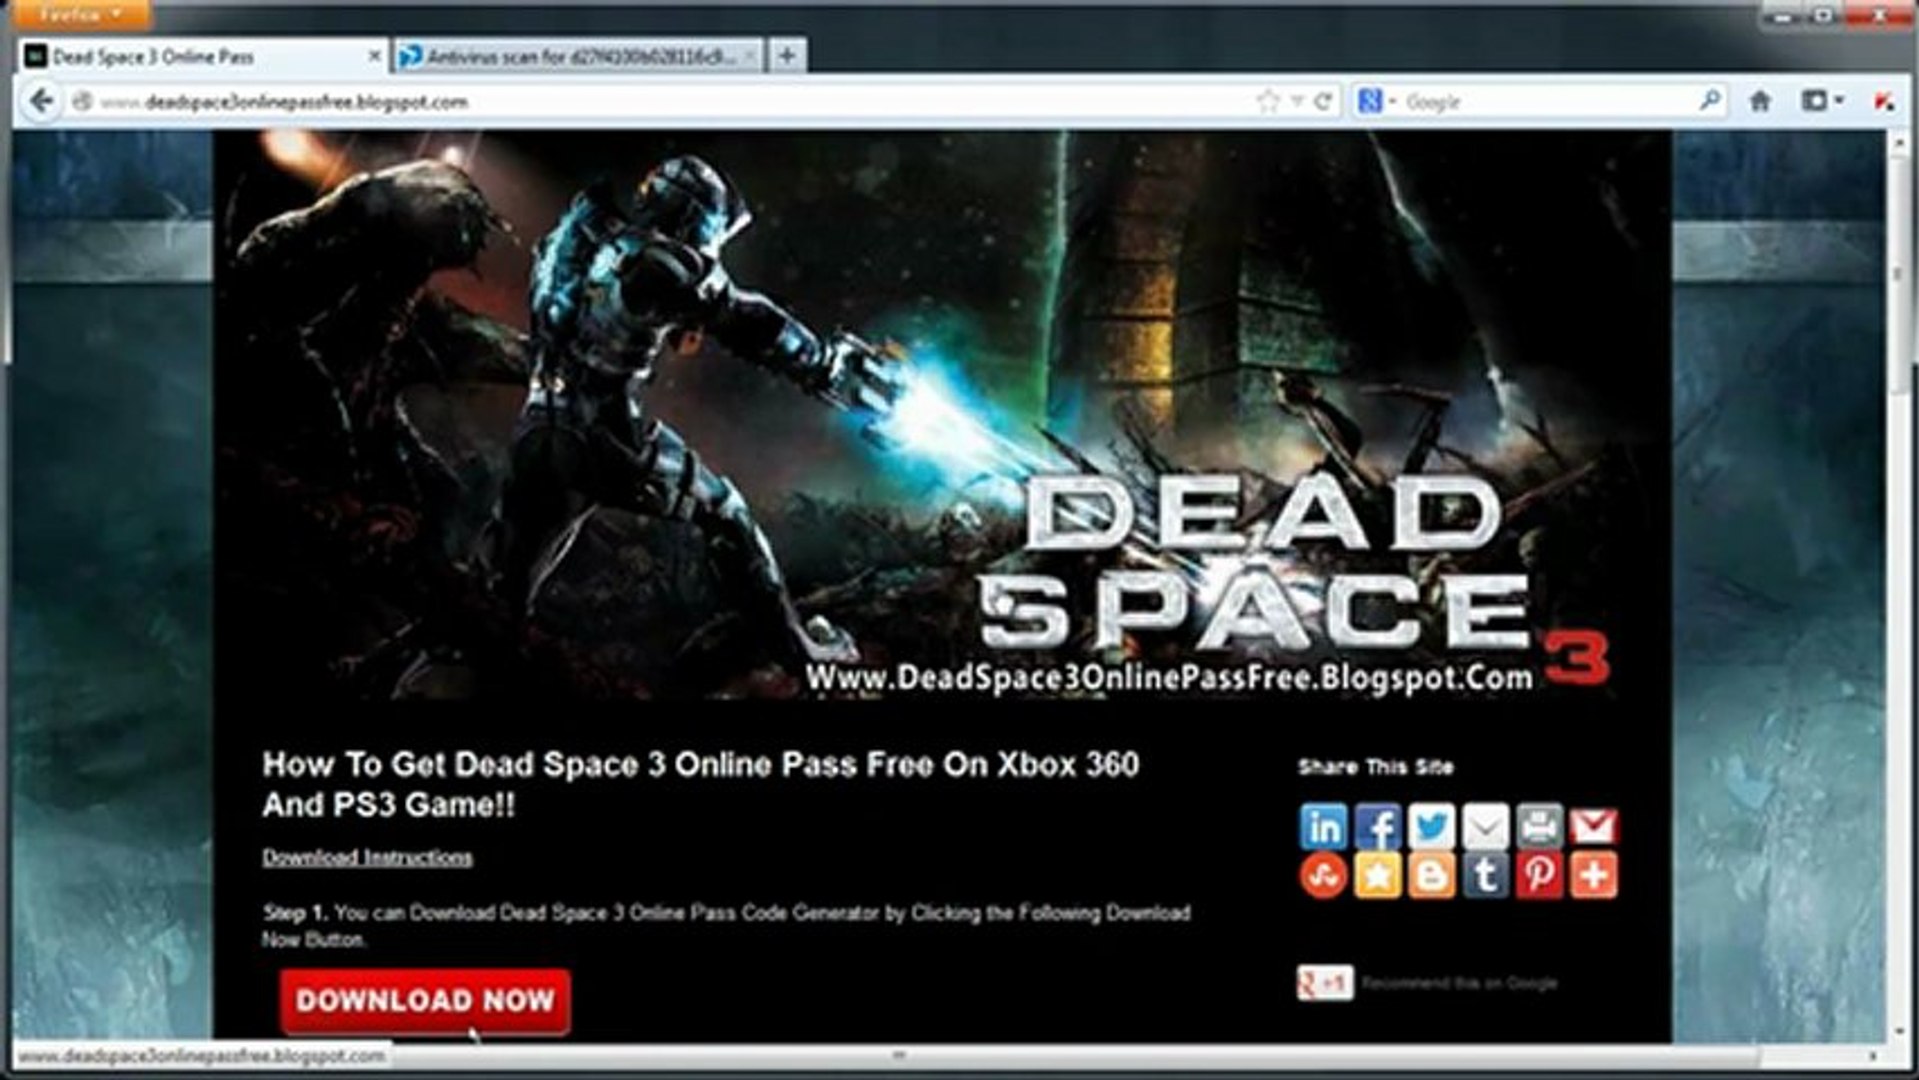 How to Get Dead Space 3 Online Pass Free on Xbox 360 And PS3 - video  Dailymotion